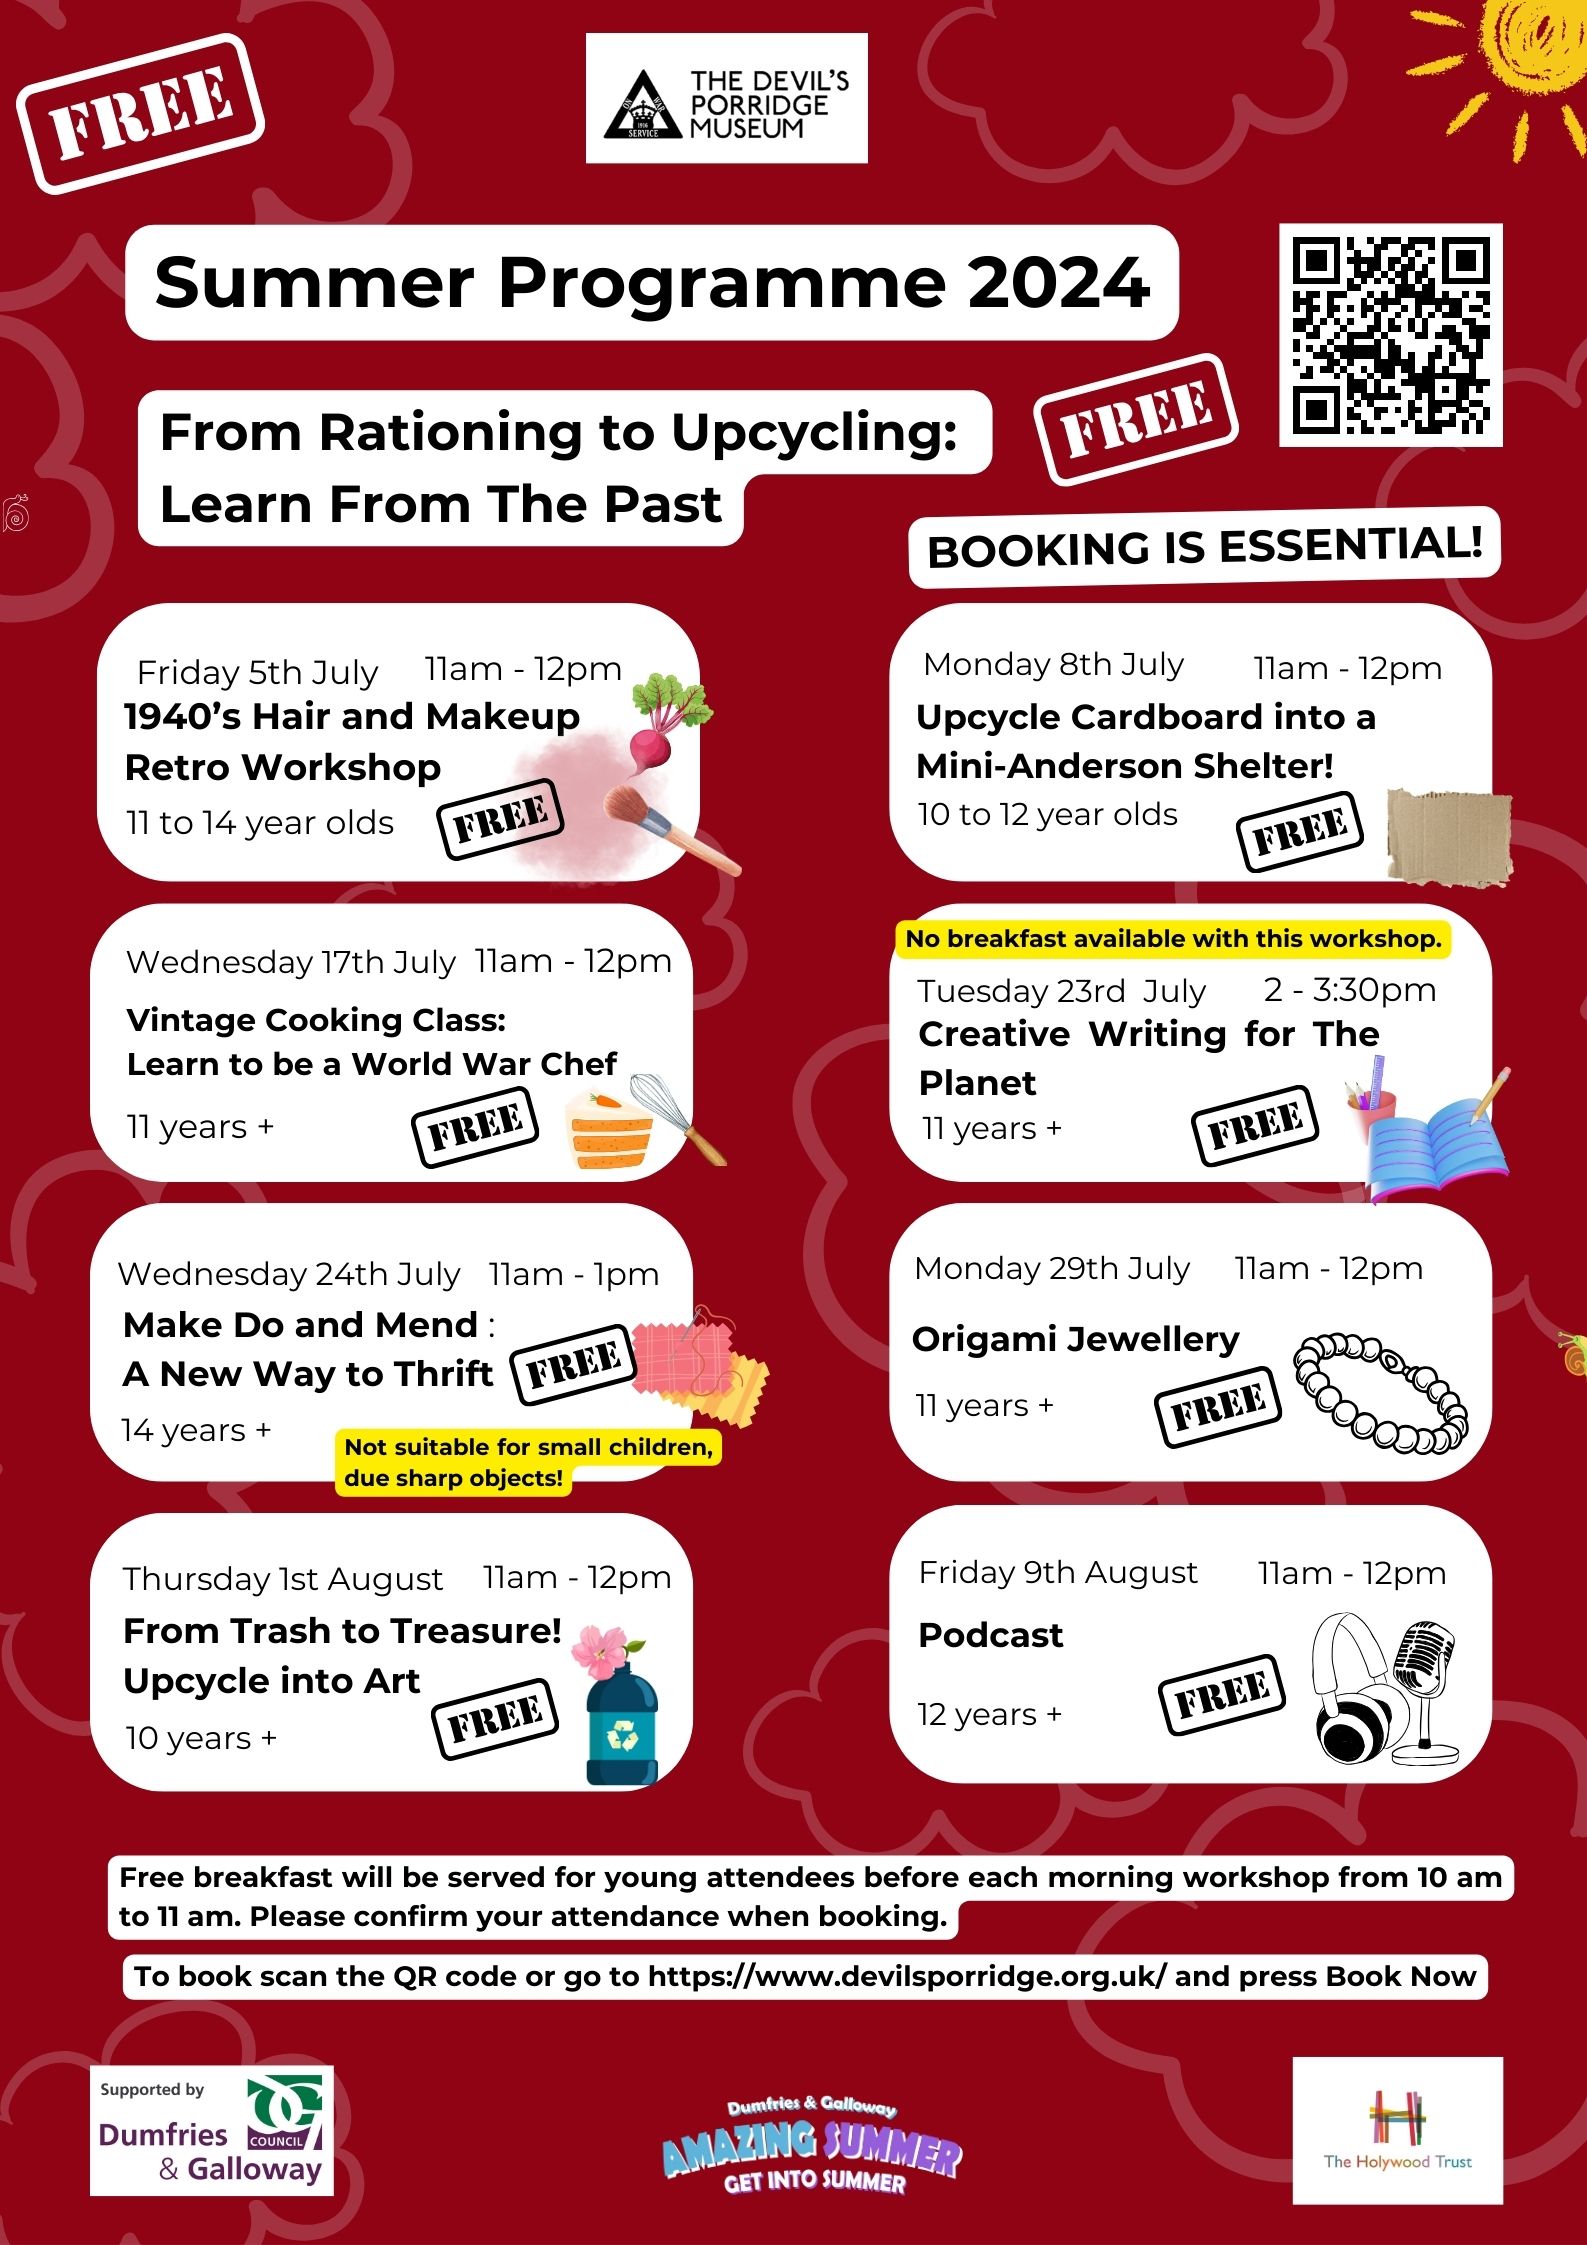 Poster for From Rationing to Upcycling: Learn From the Past activities for young people happening as part of The Devil's Porridge Museum's Summer Programme 2024.